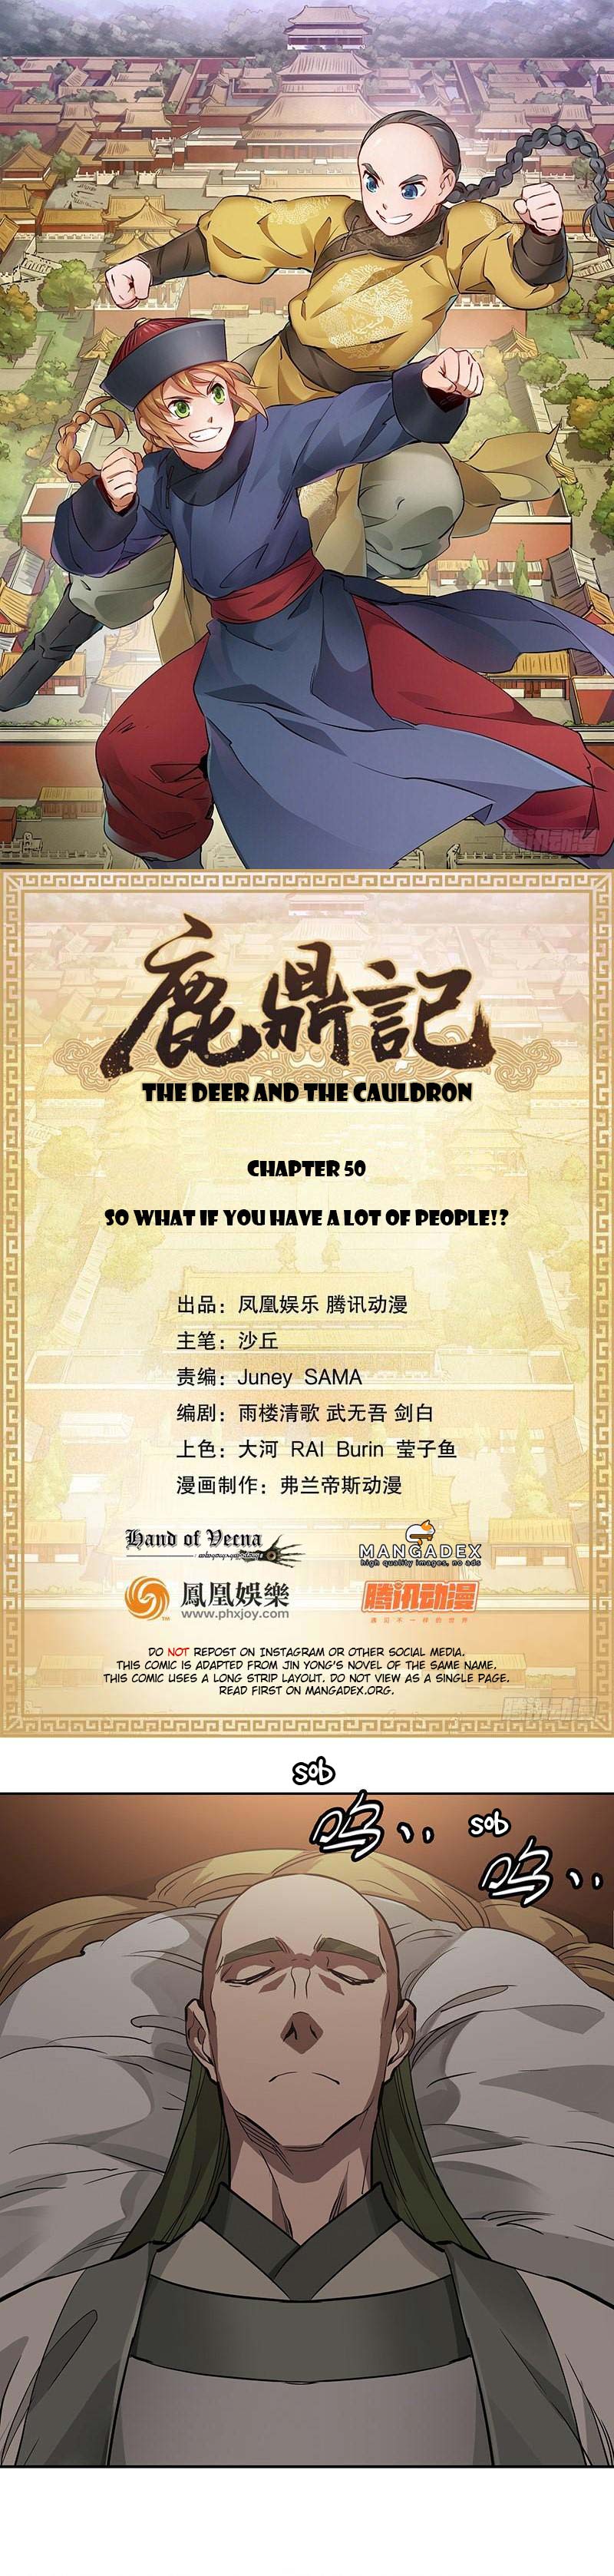 The Deer And The Cauldron Chapter 50: So What If You Have A Lot Of People!? - Picture 1